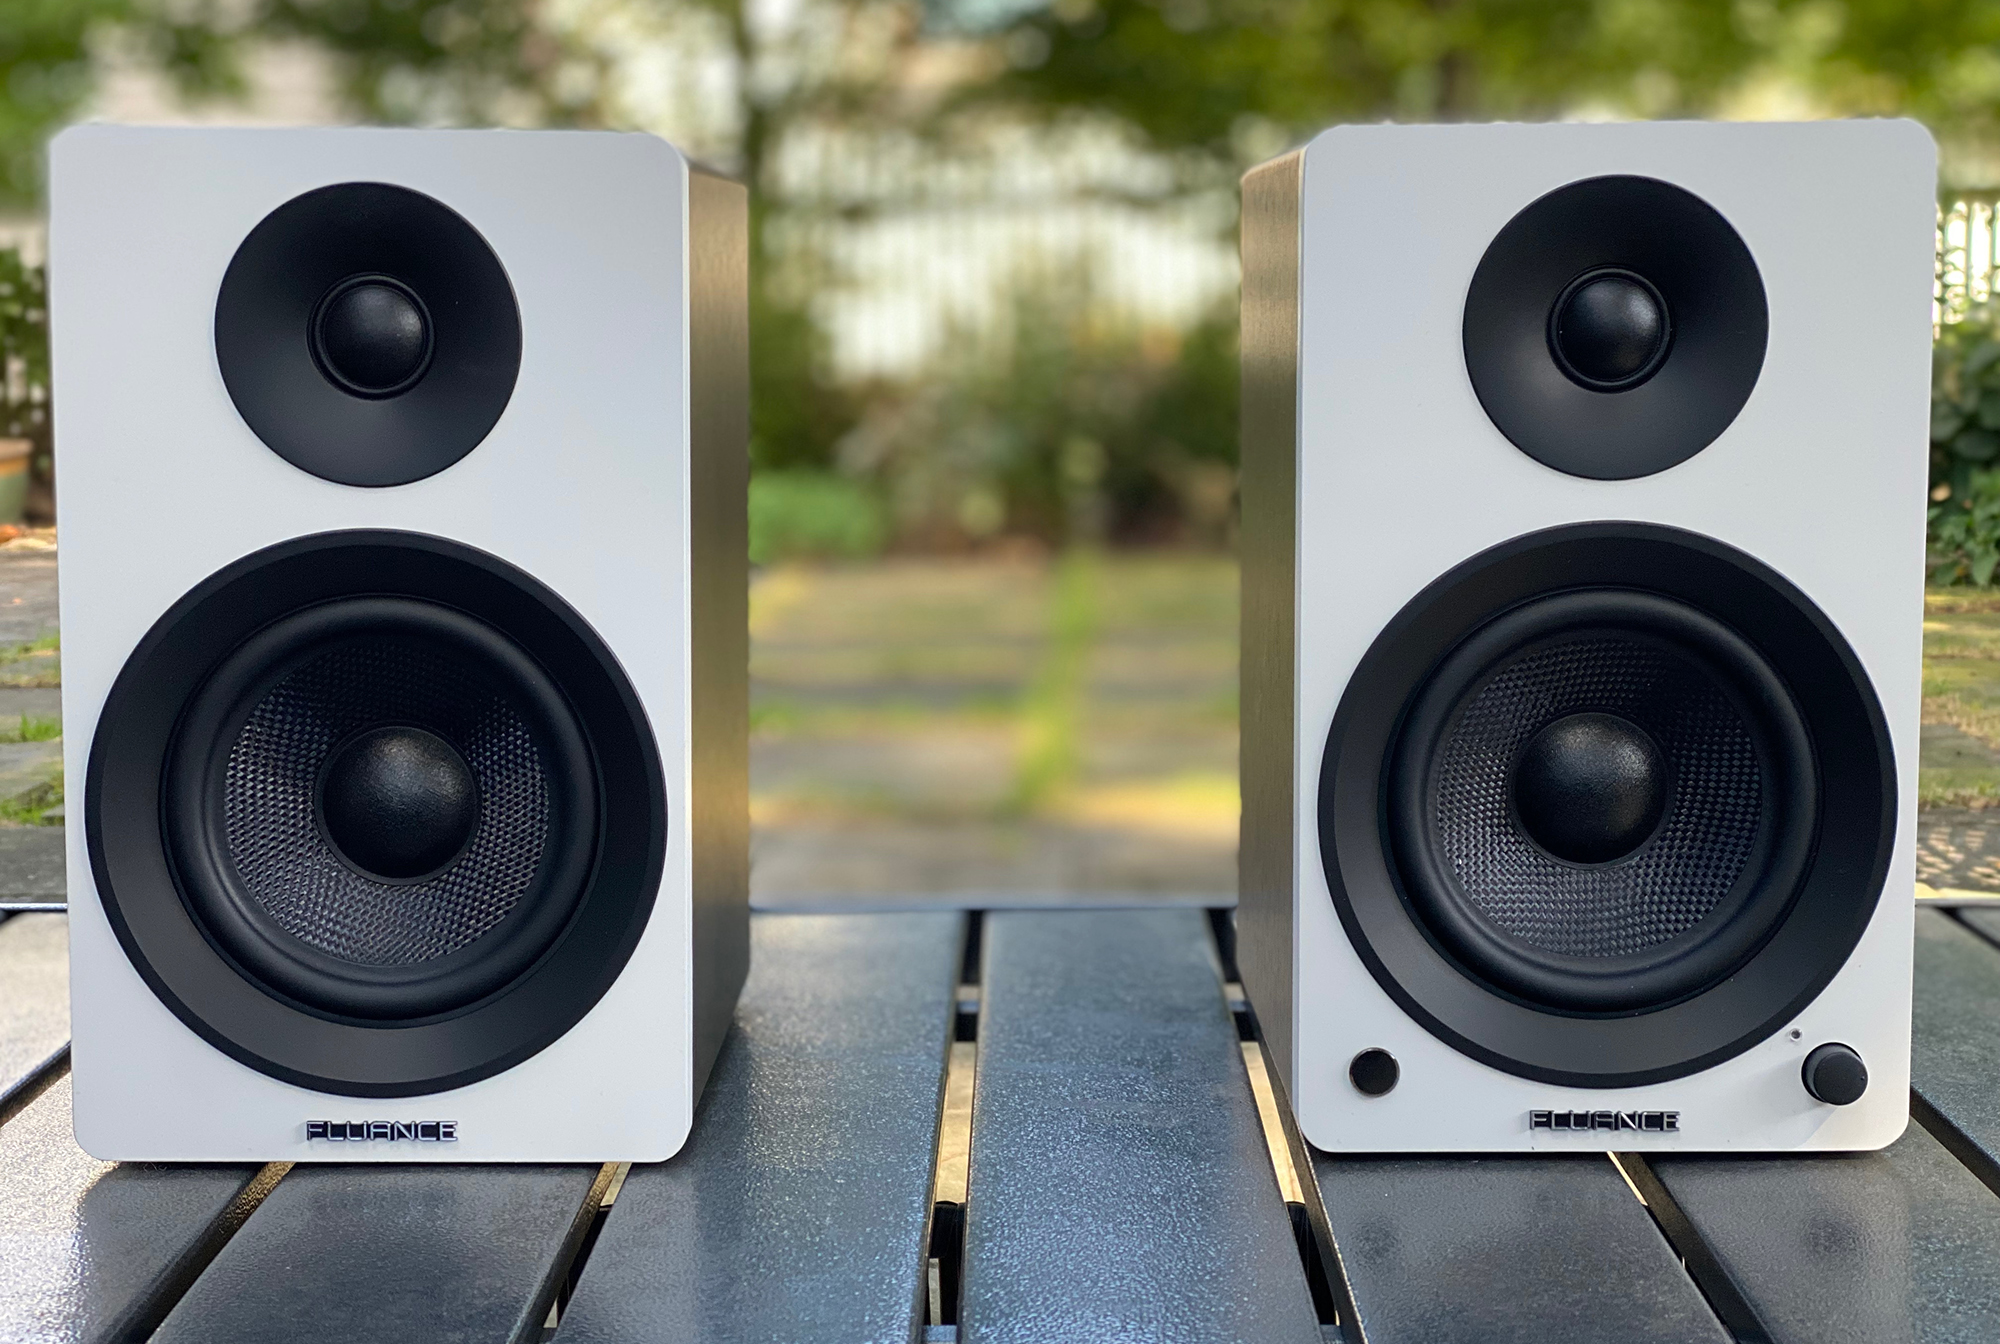 Fluance Ai41 stereo speakers review: Pint-sized powerhouses